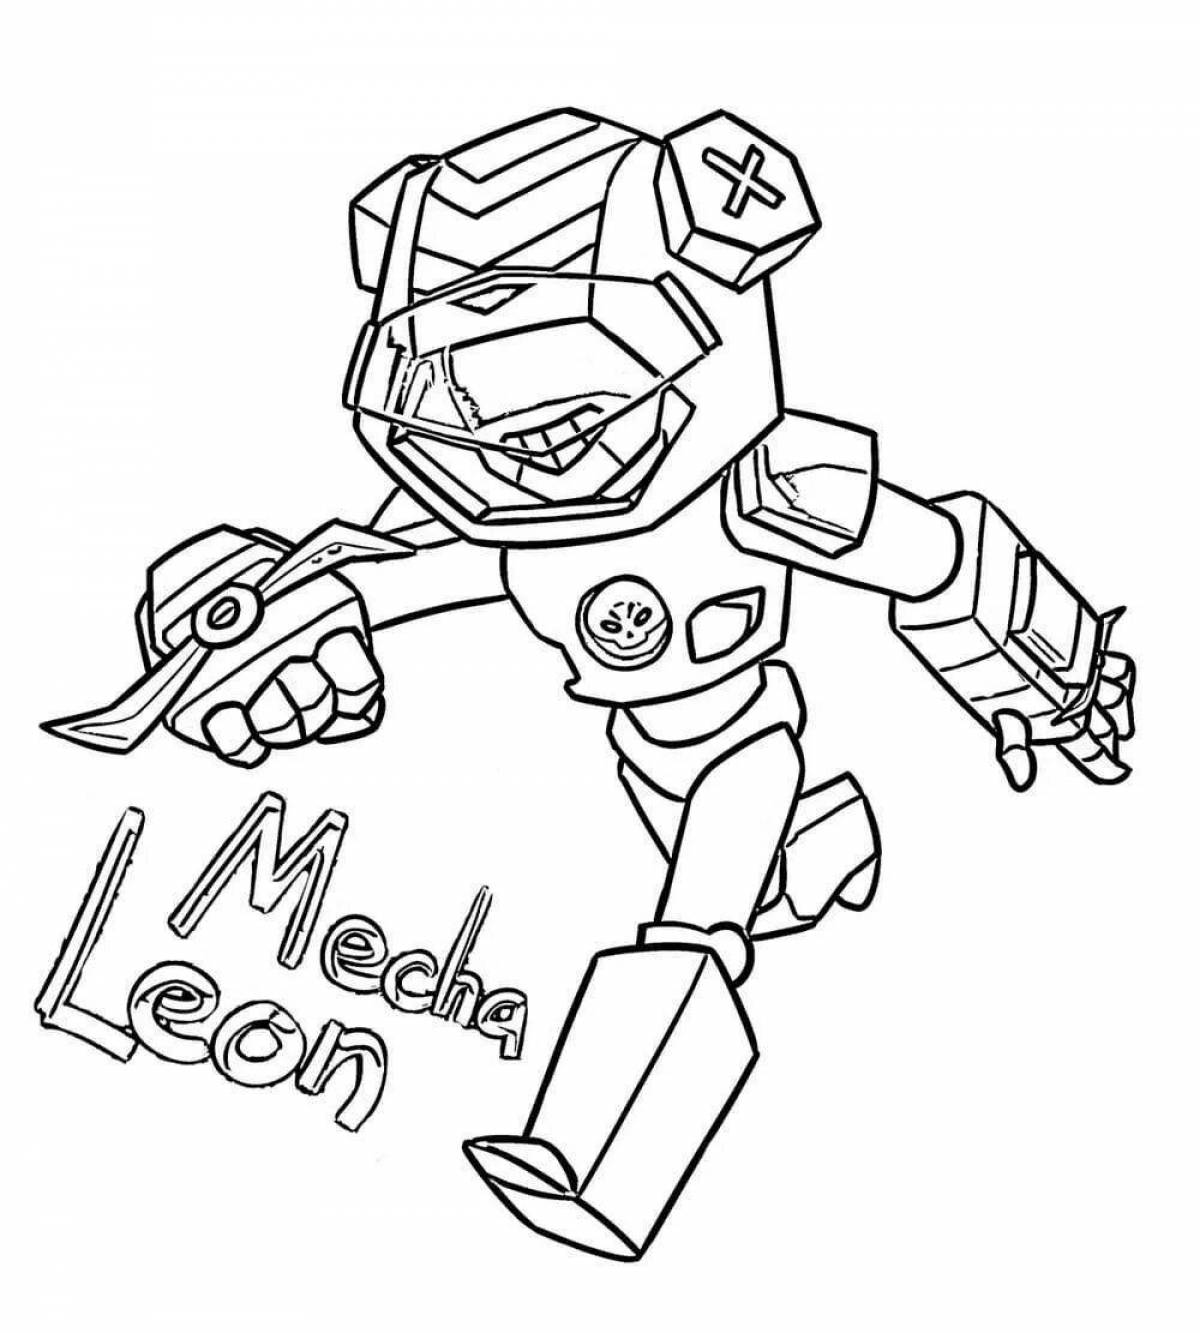 Leon's spectacular coloring book for boys